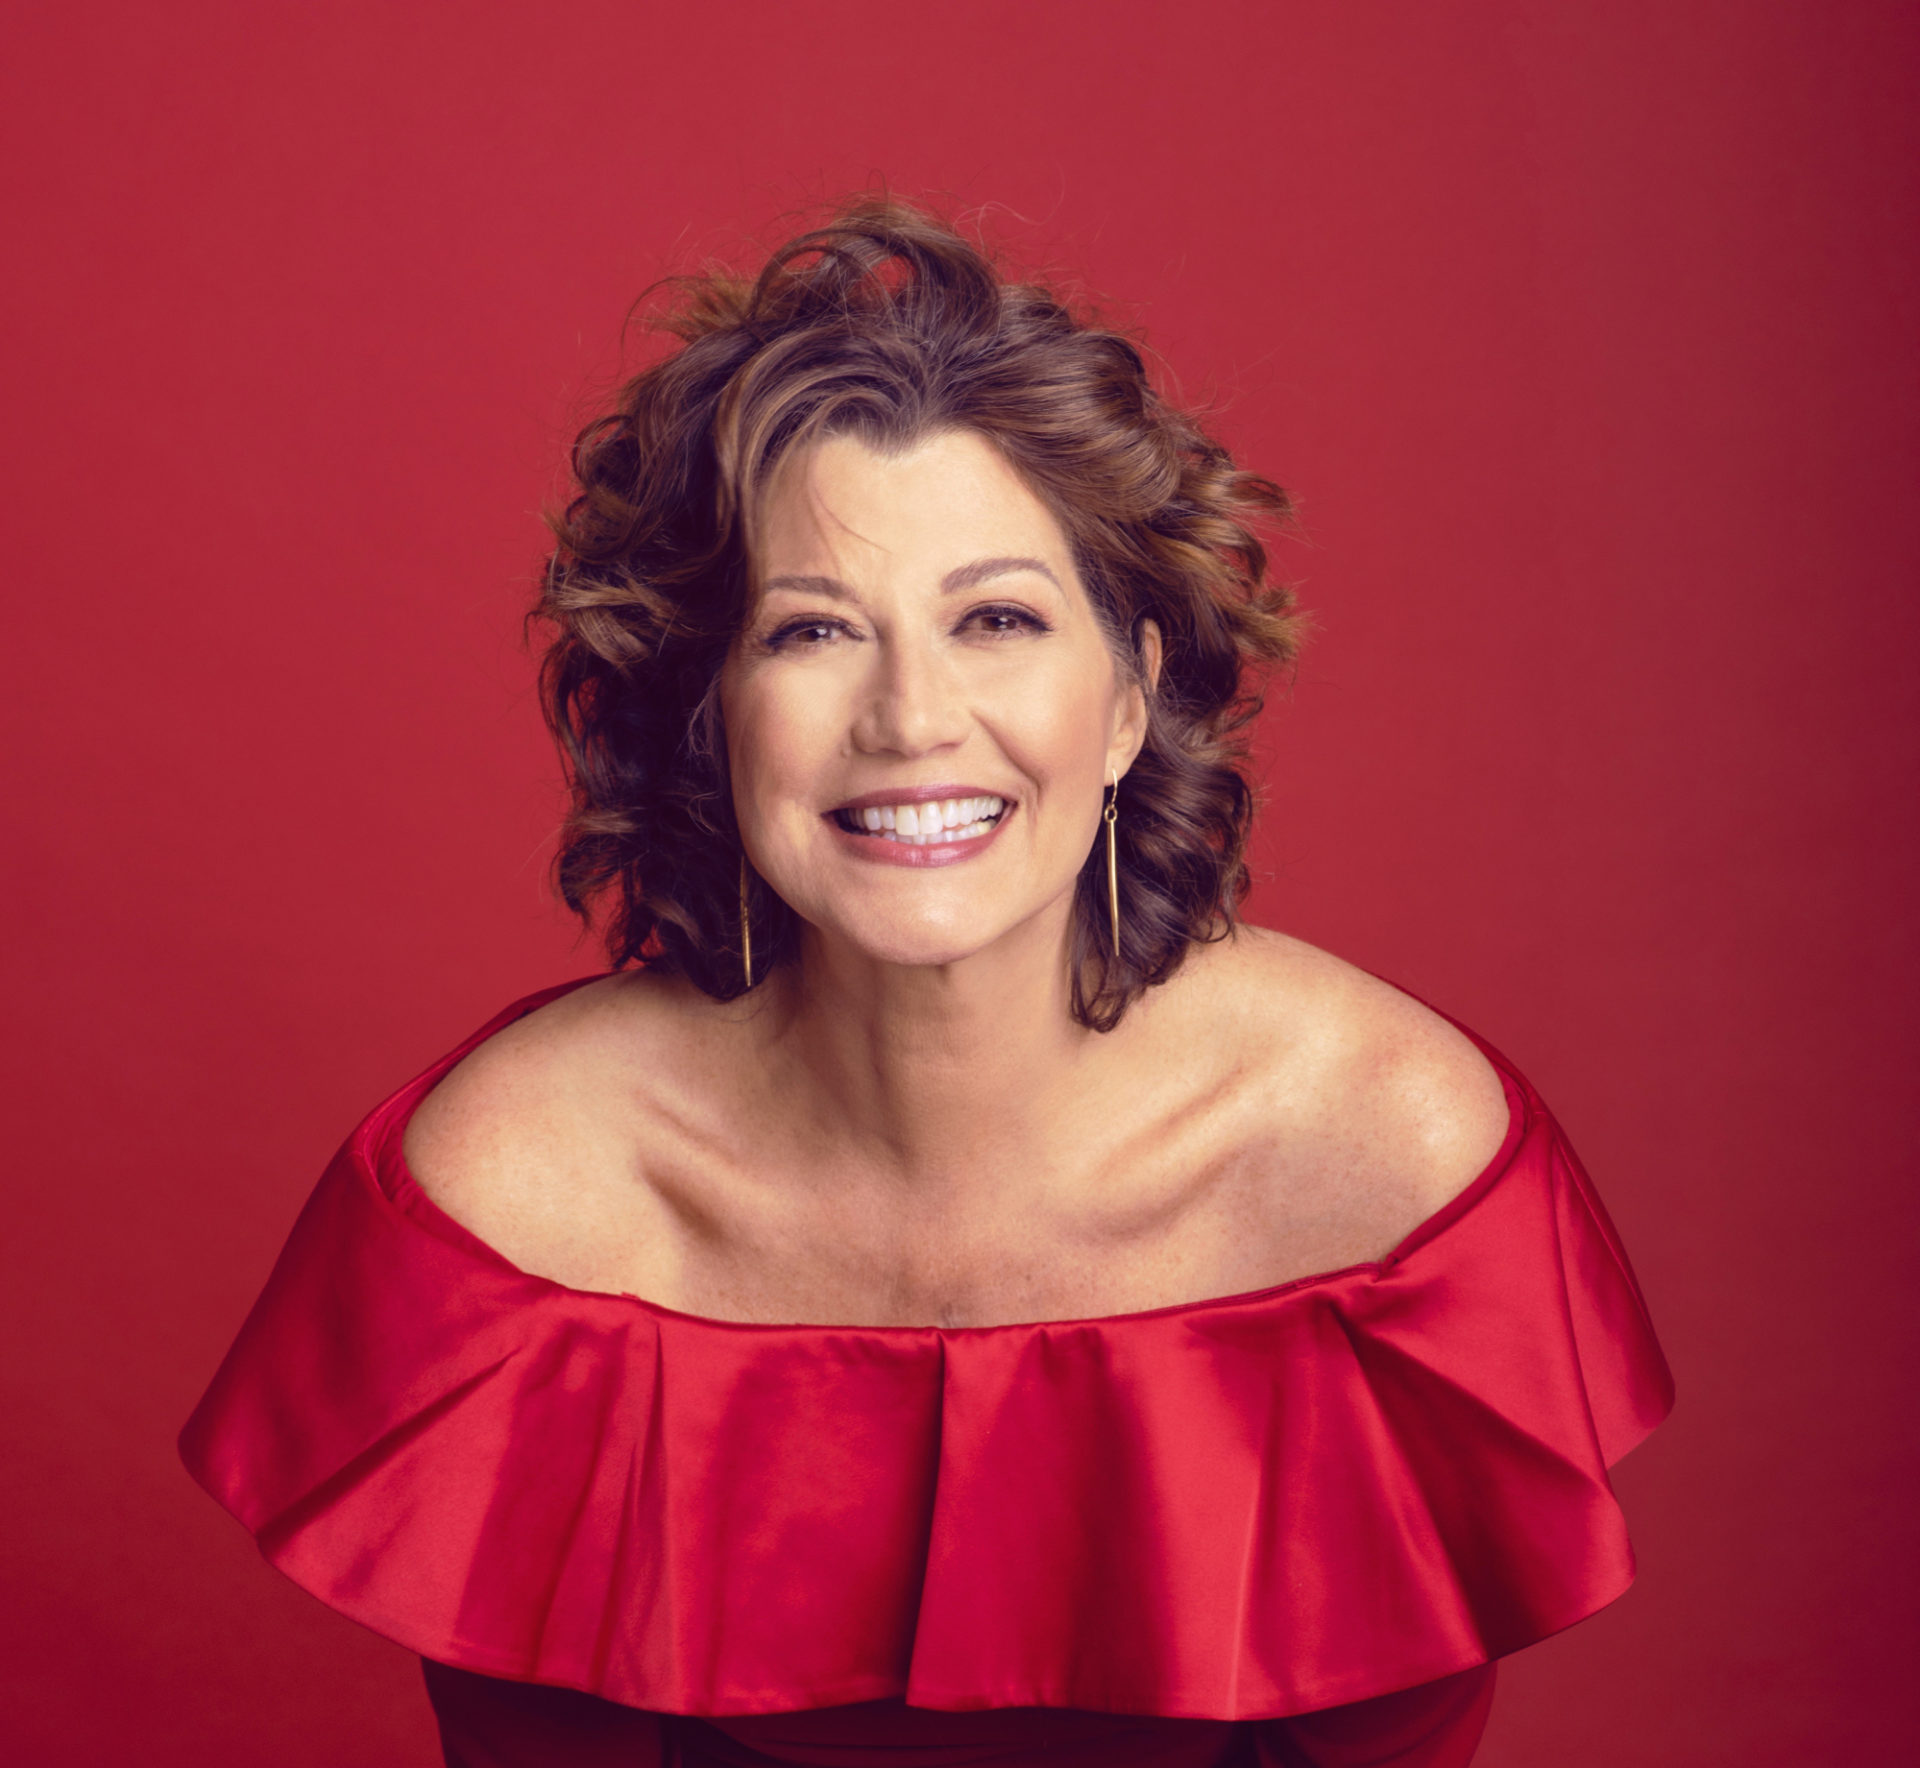 Singer Amy Grant, a white woman, seen in portrait. She is pictured wearing a red, off the shoulder shiny top. Her hair is shoulder length and curly. She is grinning at the camera. The background is red.